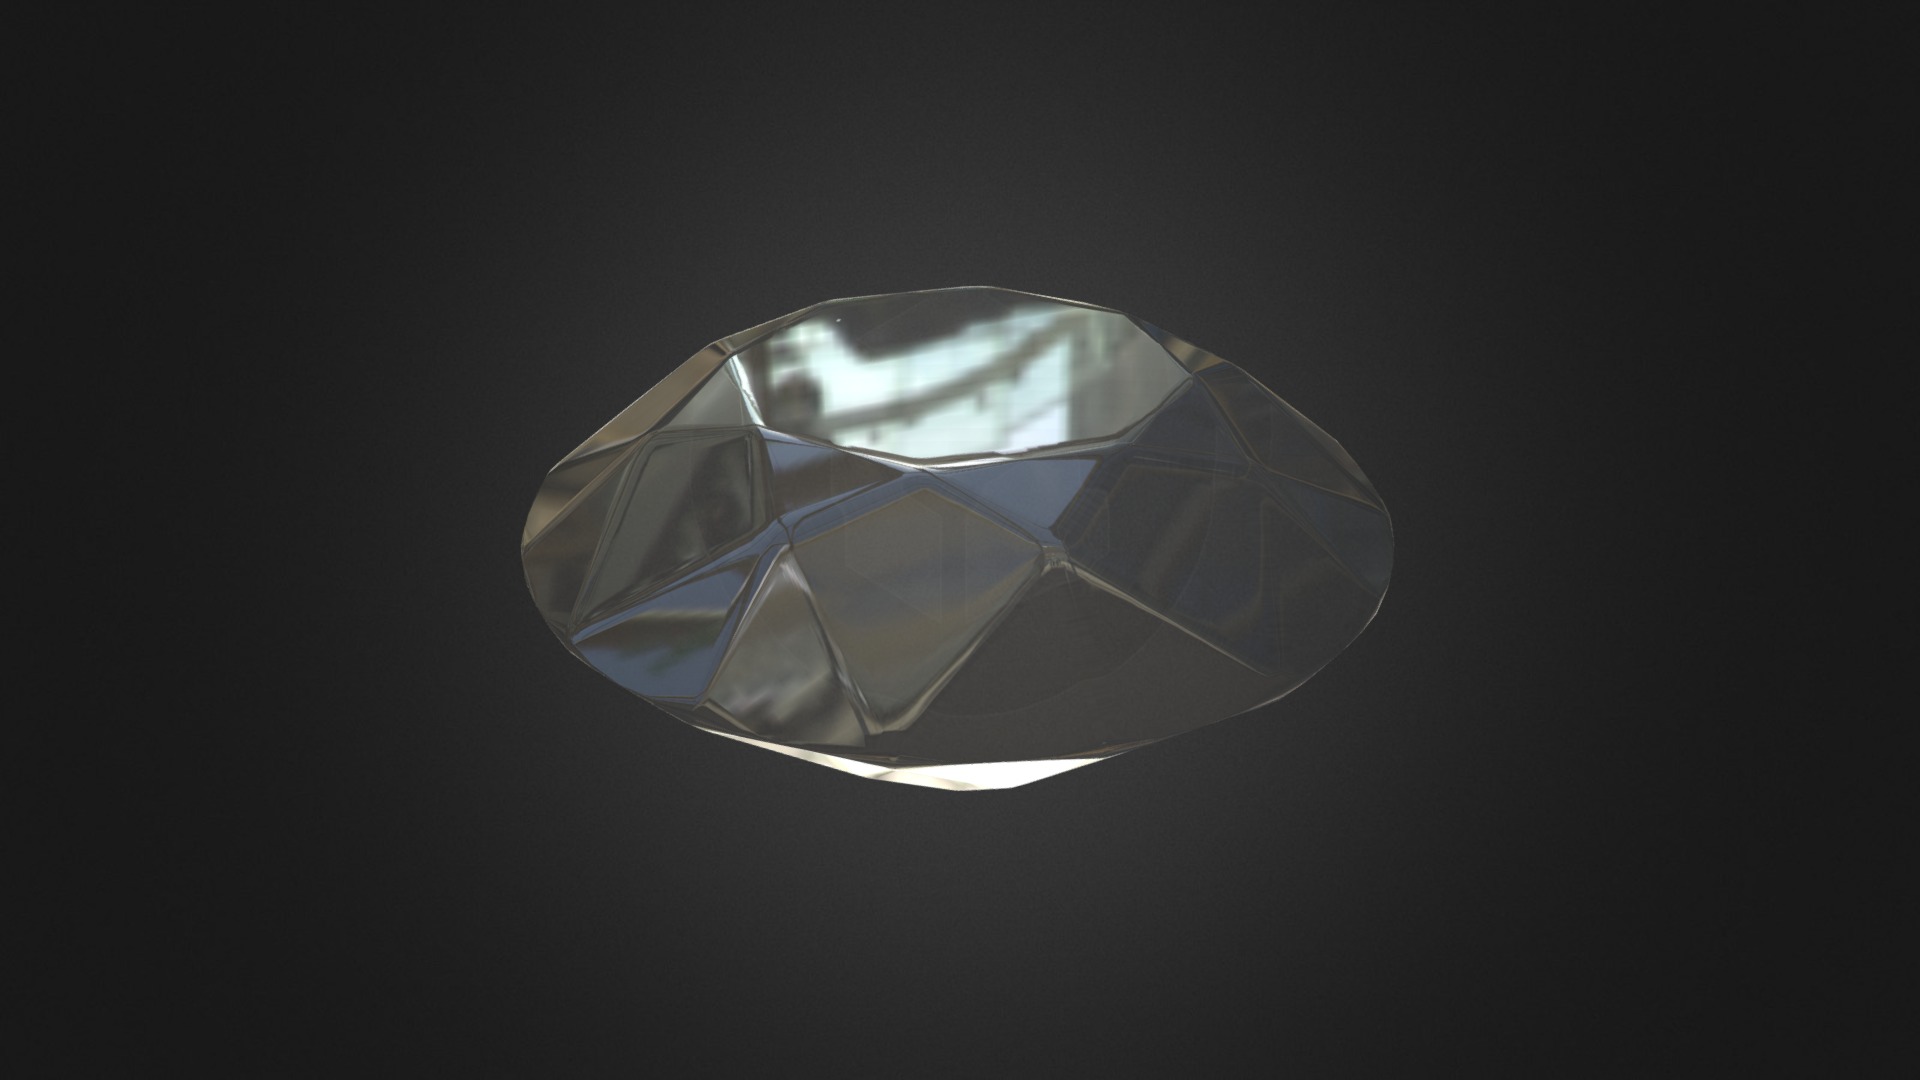 3D model Stylized diamond - This is a 3D model of the Stylized diamond. The 3D model is about a blue and white car.